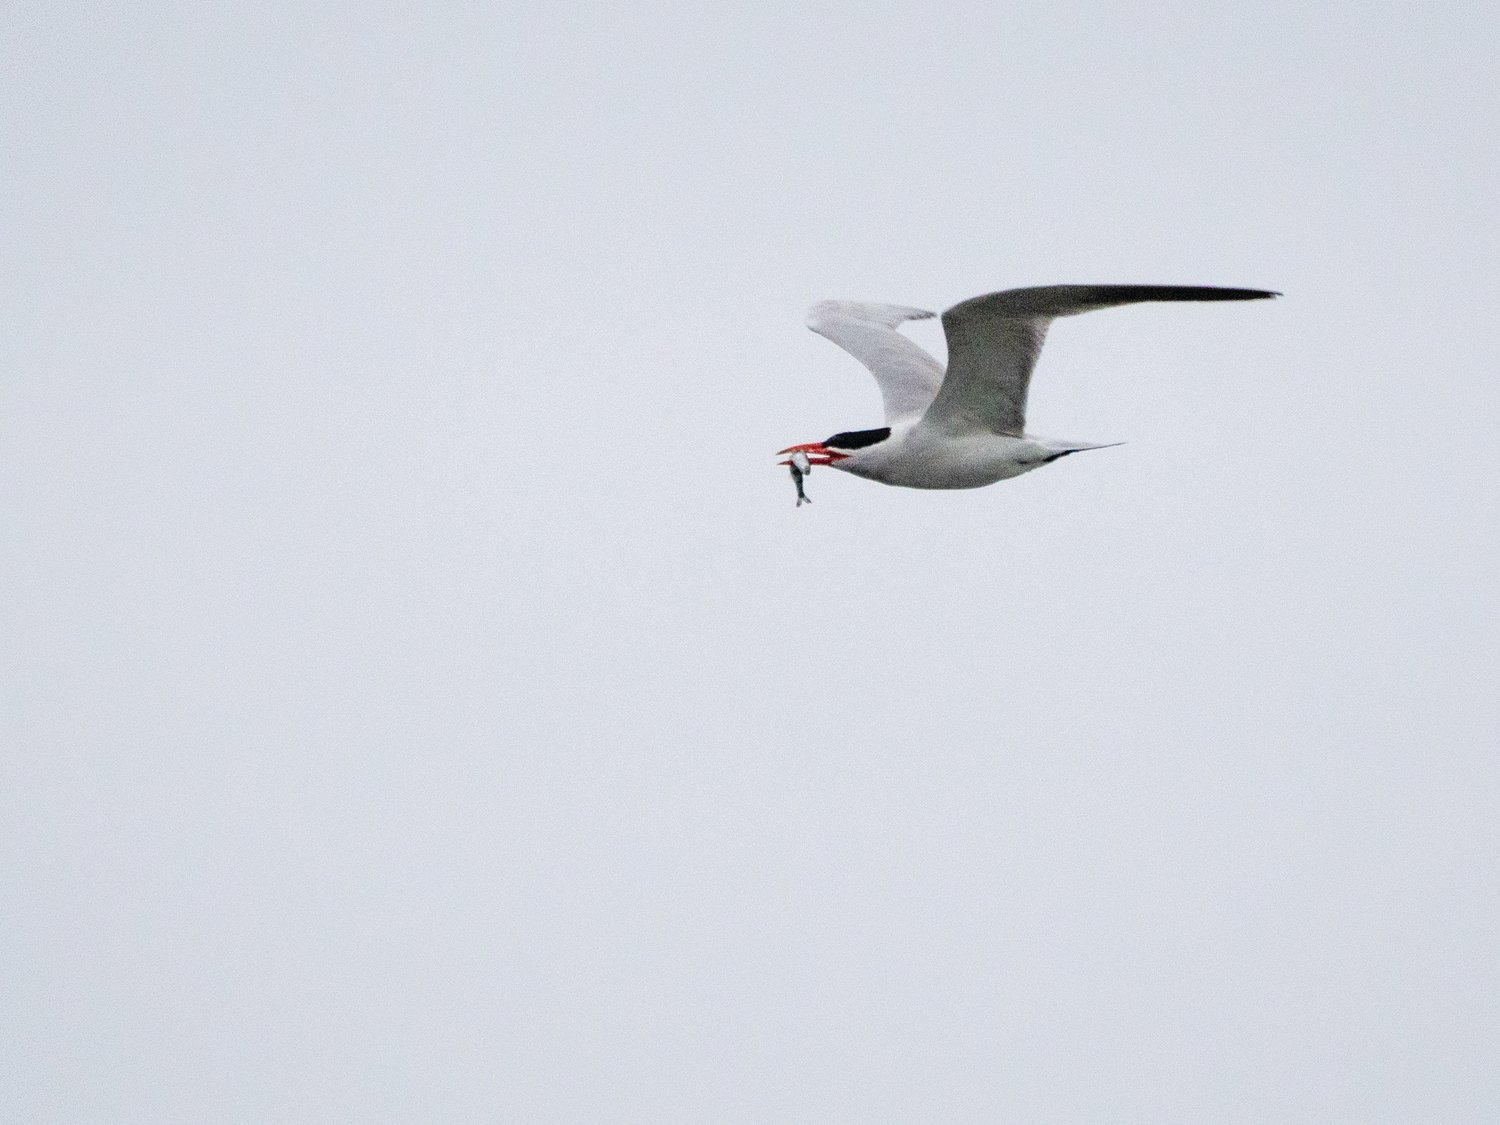 A Caspian Tern carries away a fish for a meal on the go.